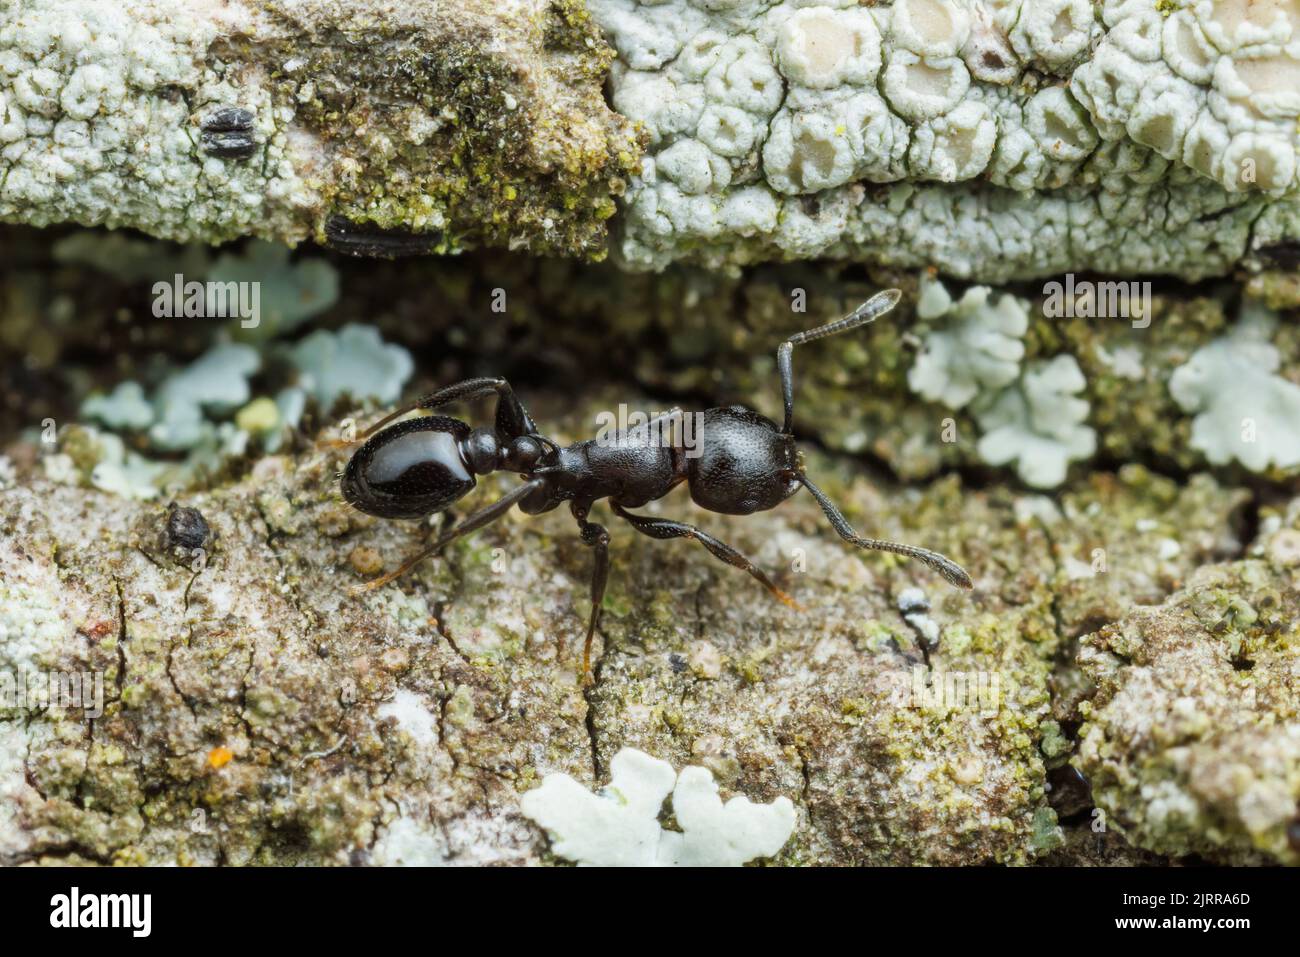 An Acorn Ant (Temnothorax misomoschus) forages on the side of a sabal palm (Sabal mexicana) tree. Stock Photo